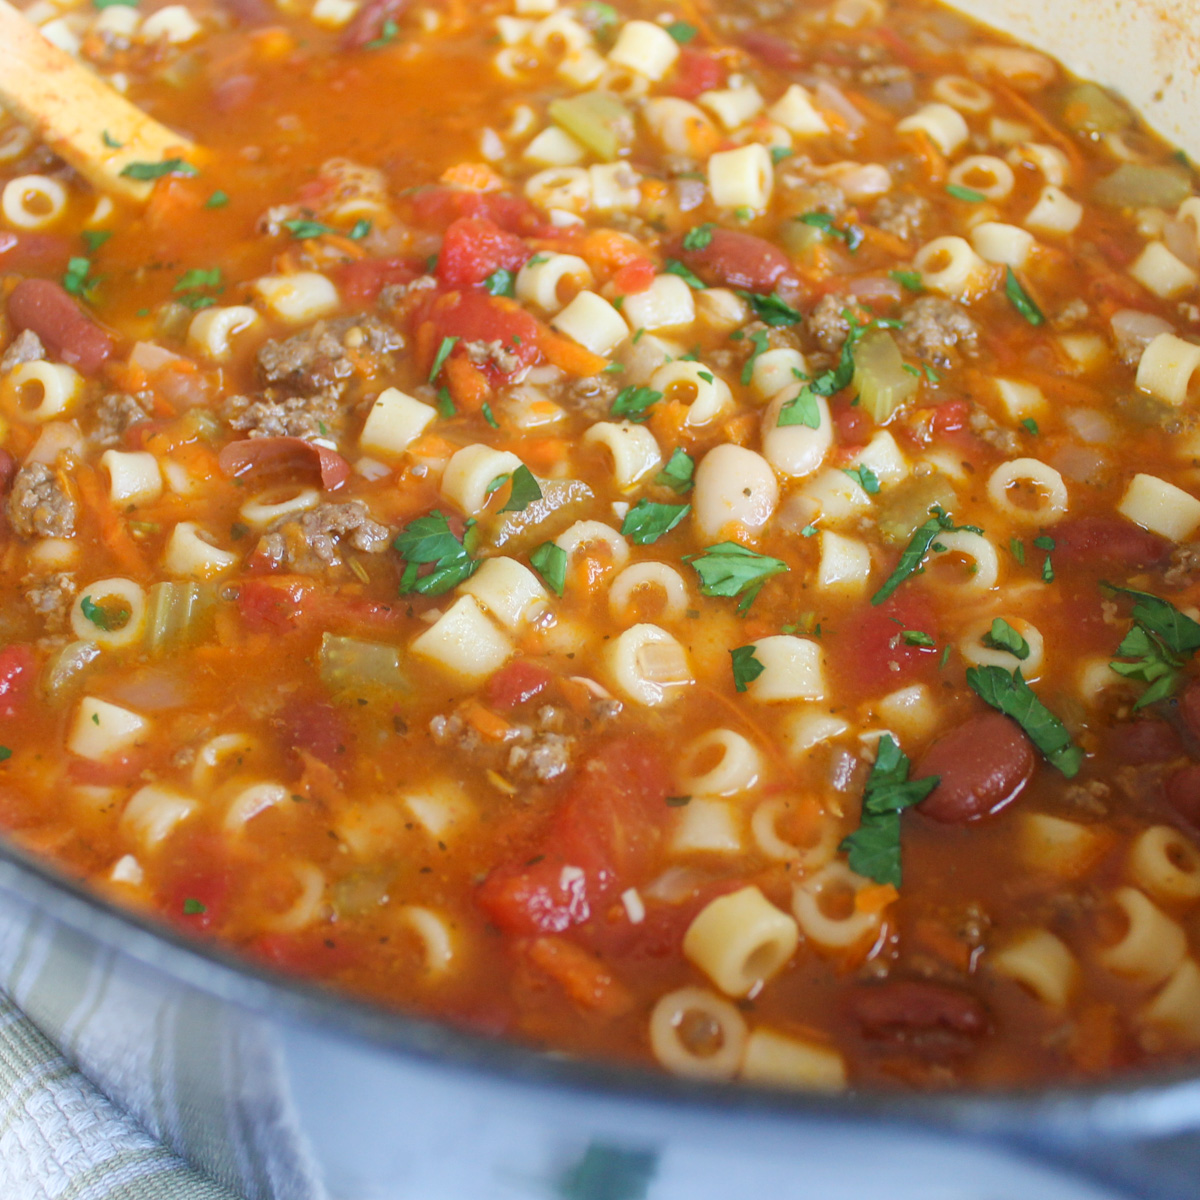 A pot of Pasta Fagioli Soup in a rich red tomato broth with beef, veggies, beans and pasta.